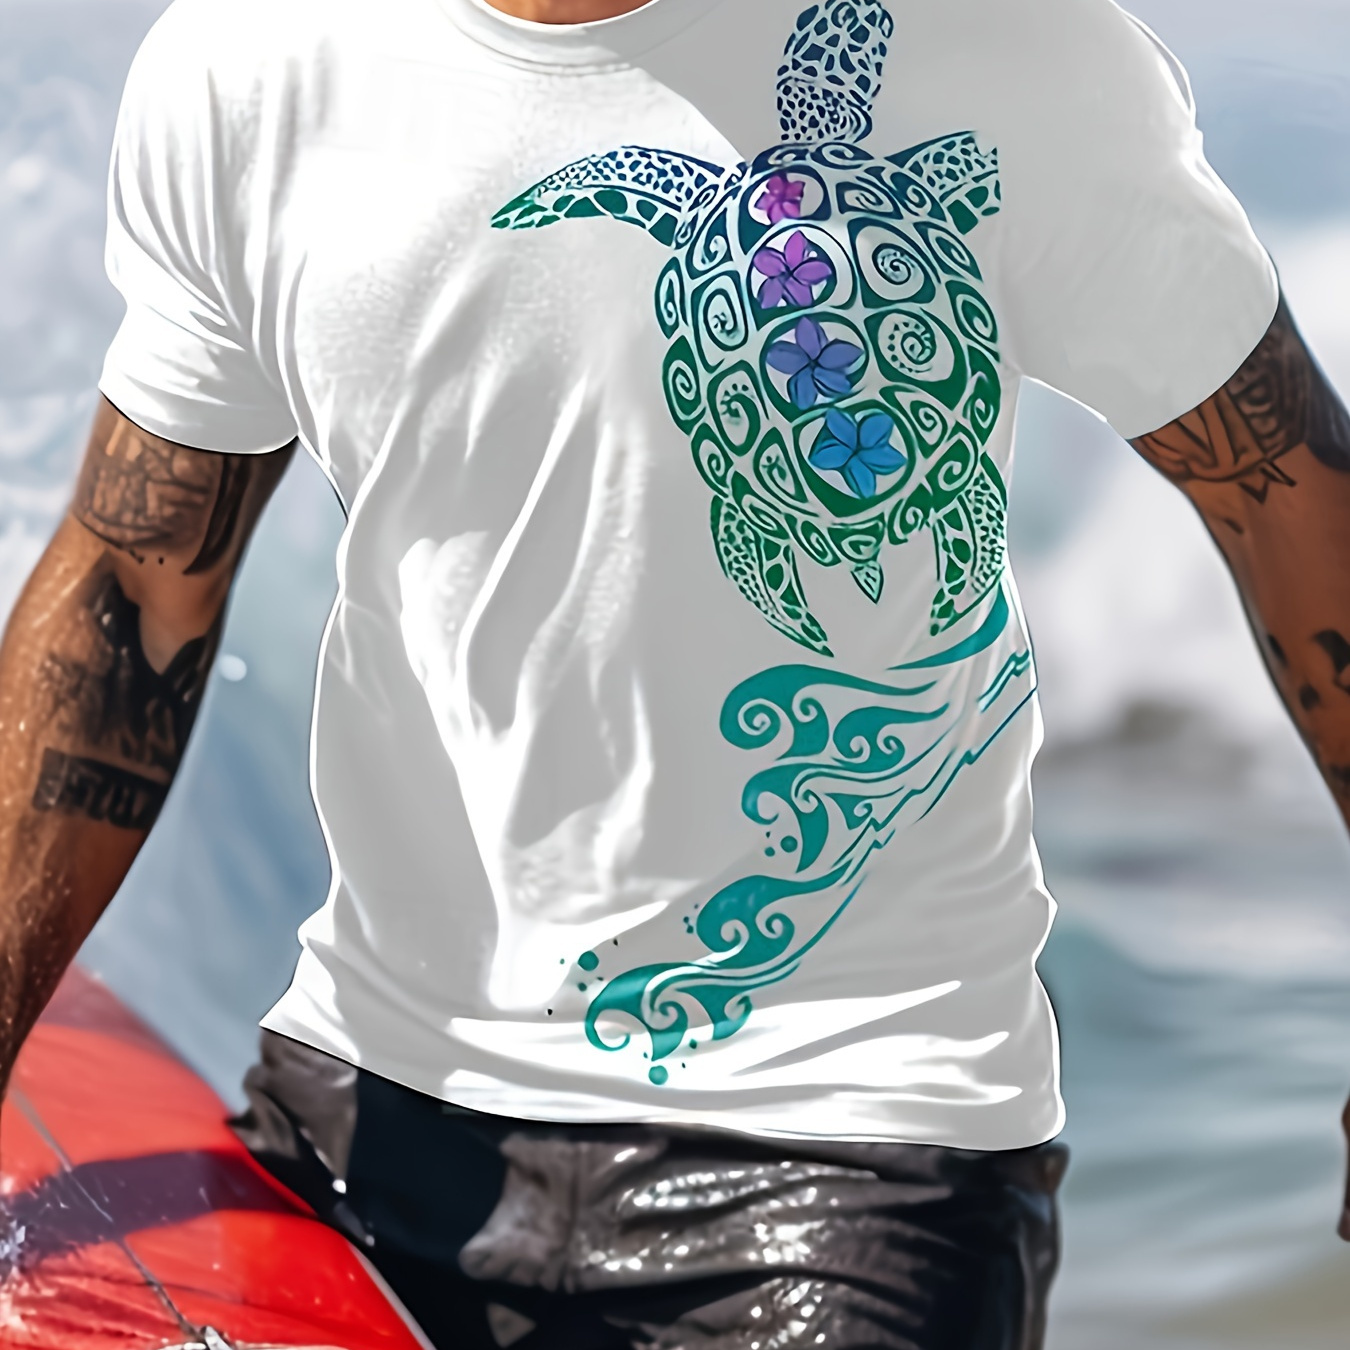 

Men's Ethnic Style Sea Turtle Pattern Print Crew Neck And Short Sleeve T-shirt For Summer Leisurewear And Vacation, Chic And Trendy Hawaiian Style Tops For Men